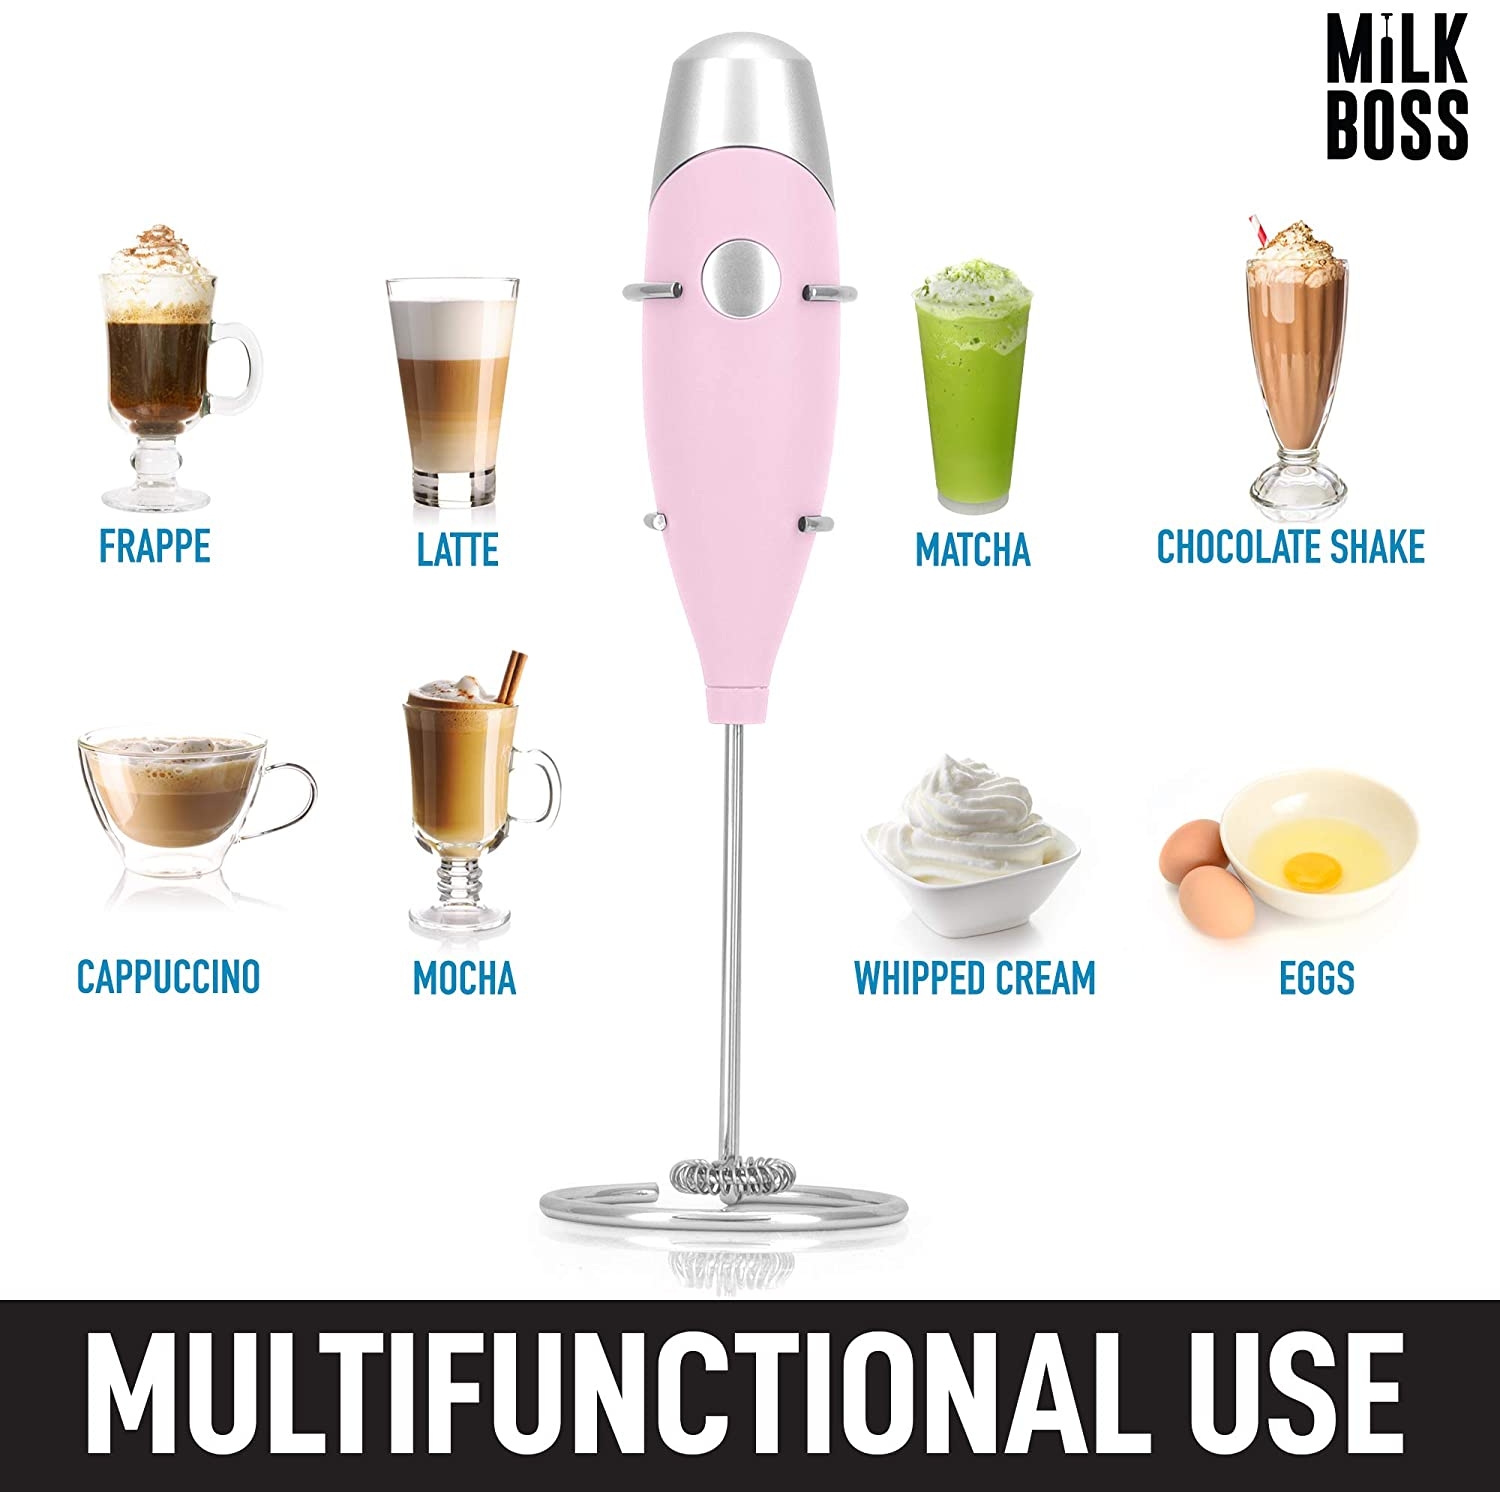 The Official Milk Boss Milk Frother Color Guide!